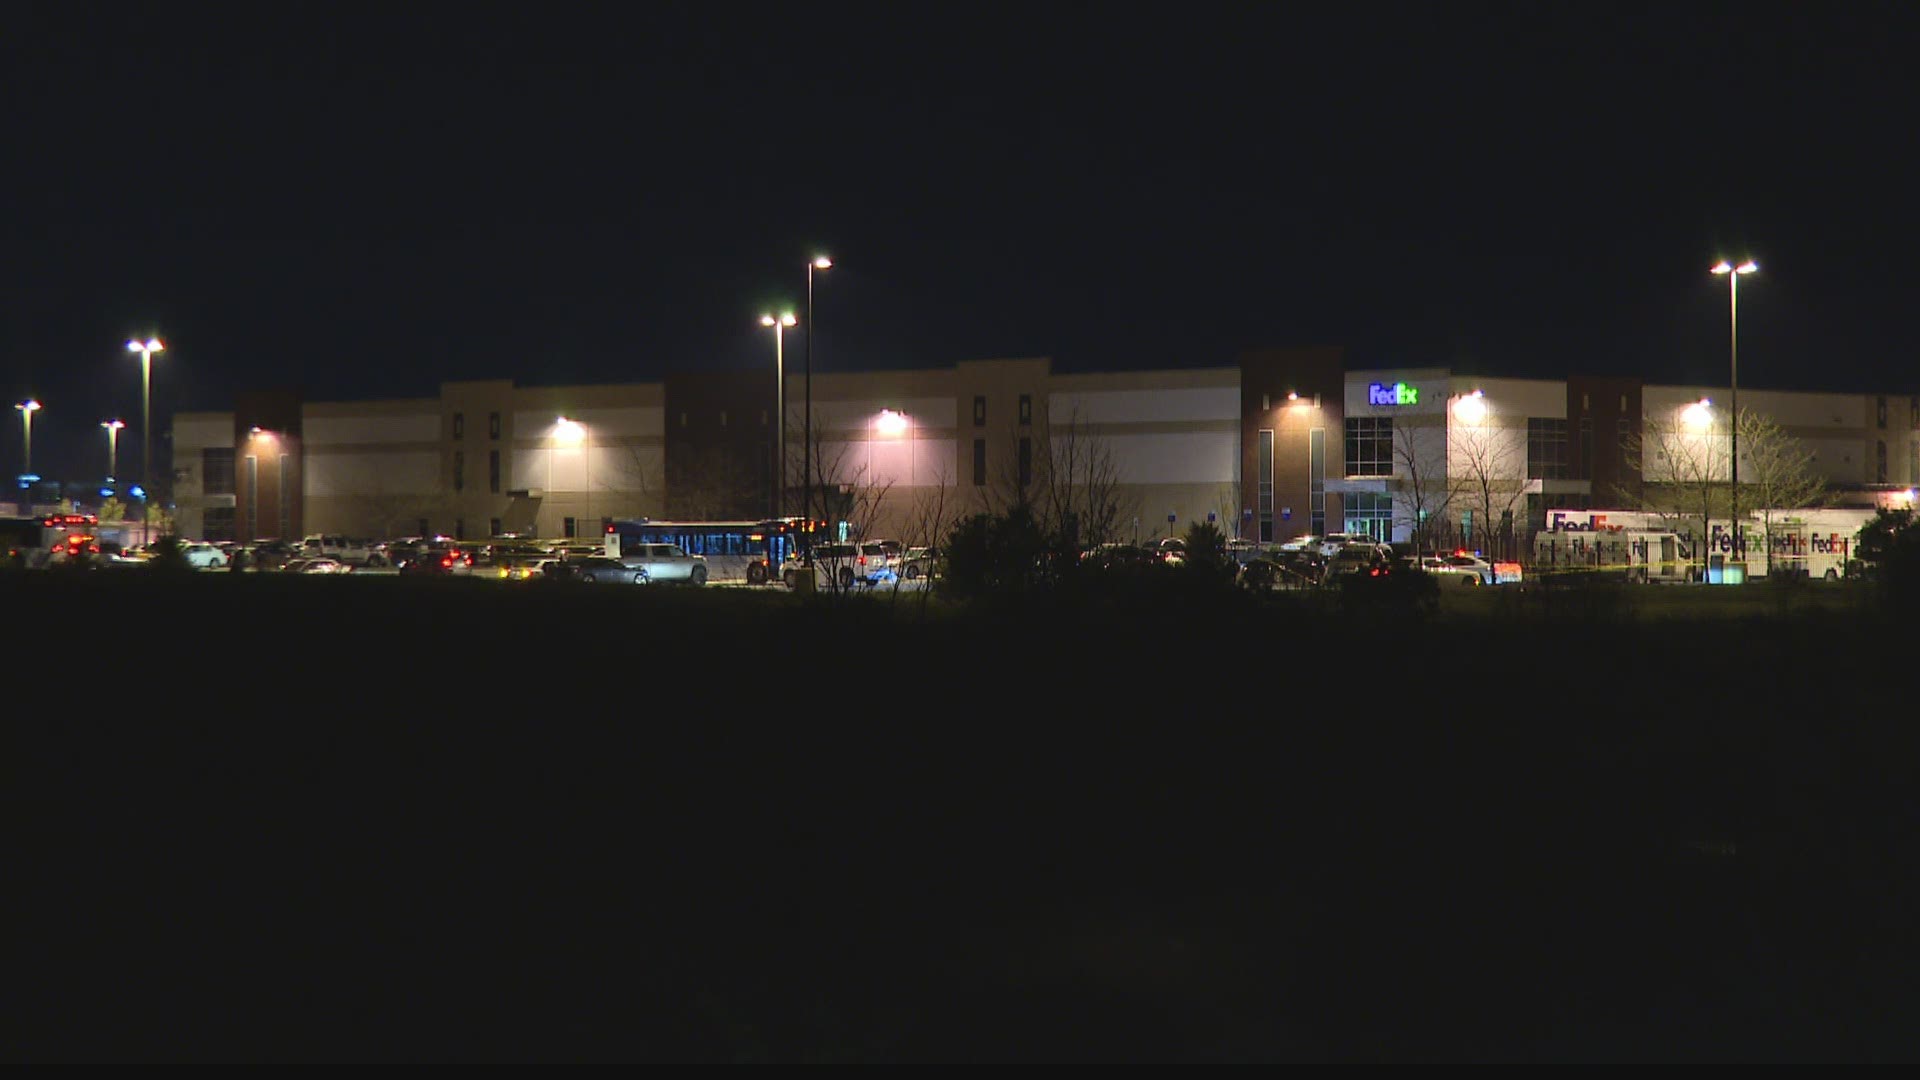 A tragic shooting at a FedEx Ground facility overnight left 8 people dead.